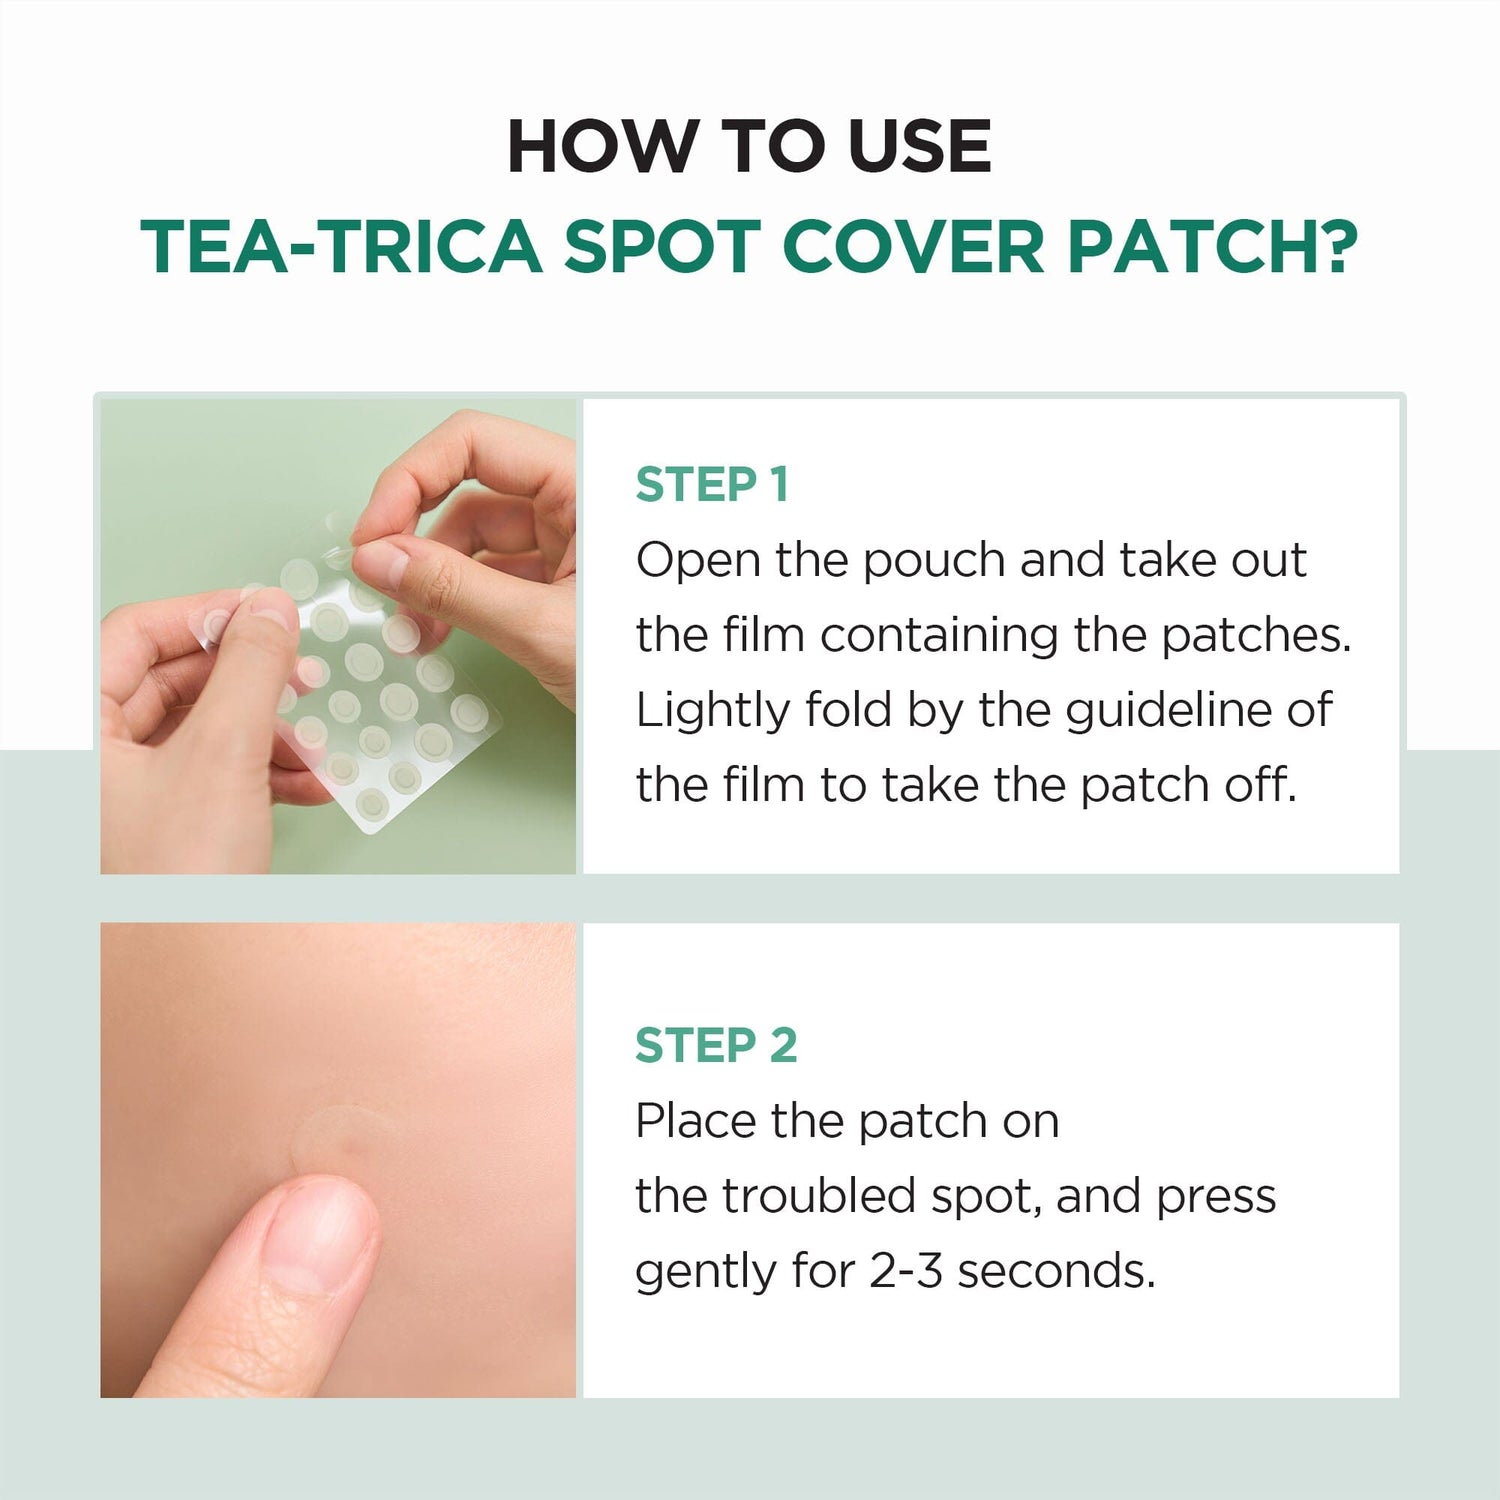 SKIN1004 Tea-Trica Spot Cover Patch 22EA, at Orion Beauty. SKIN1004 Official Sole Authorized Retailer in Sri Lanka!